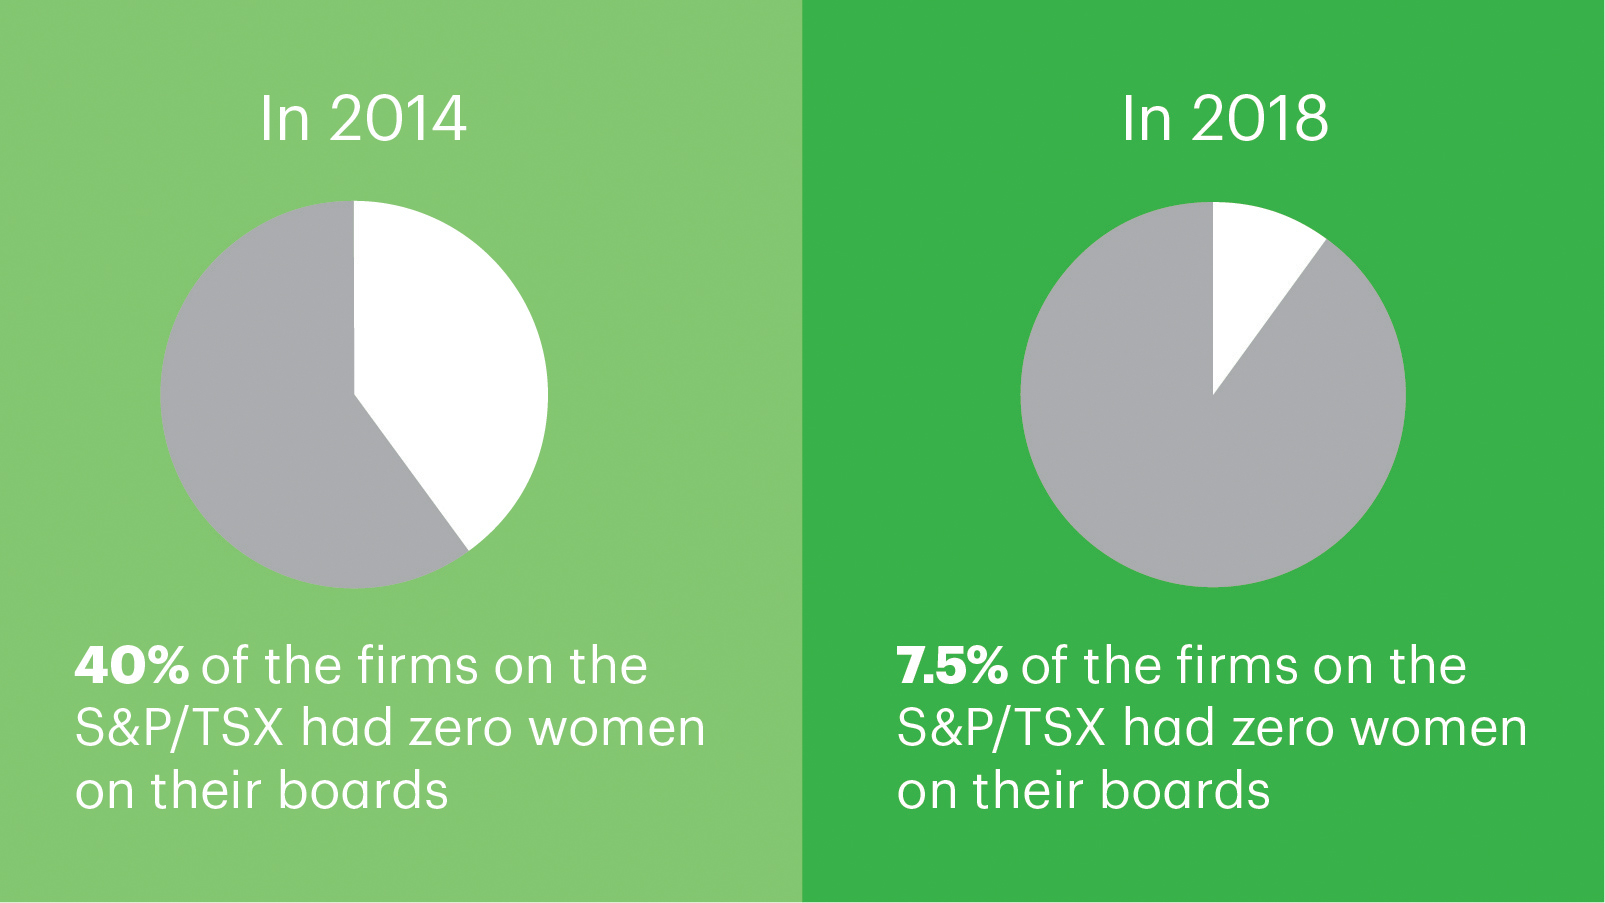 Image of two pie charts. In 2014, 40% of the firms on the S&P/TSX had zero women on their boards. In 2018, 7.5% of the firms on the S&P/TSX had zero women on their boards.